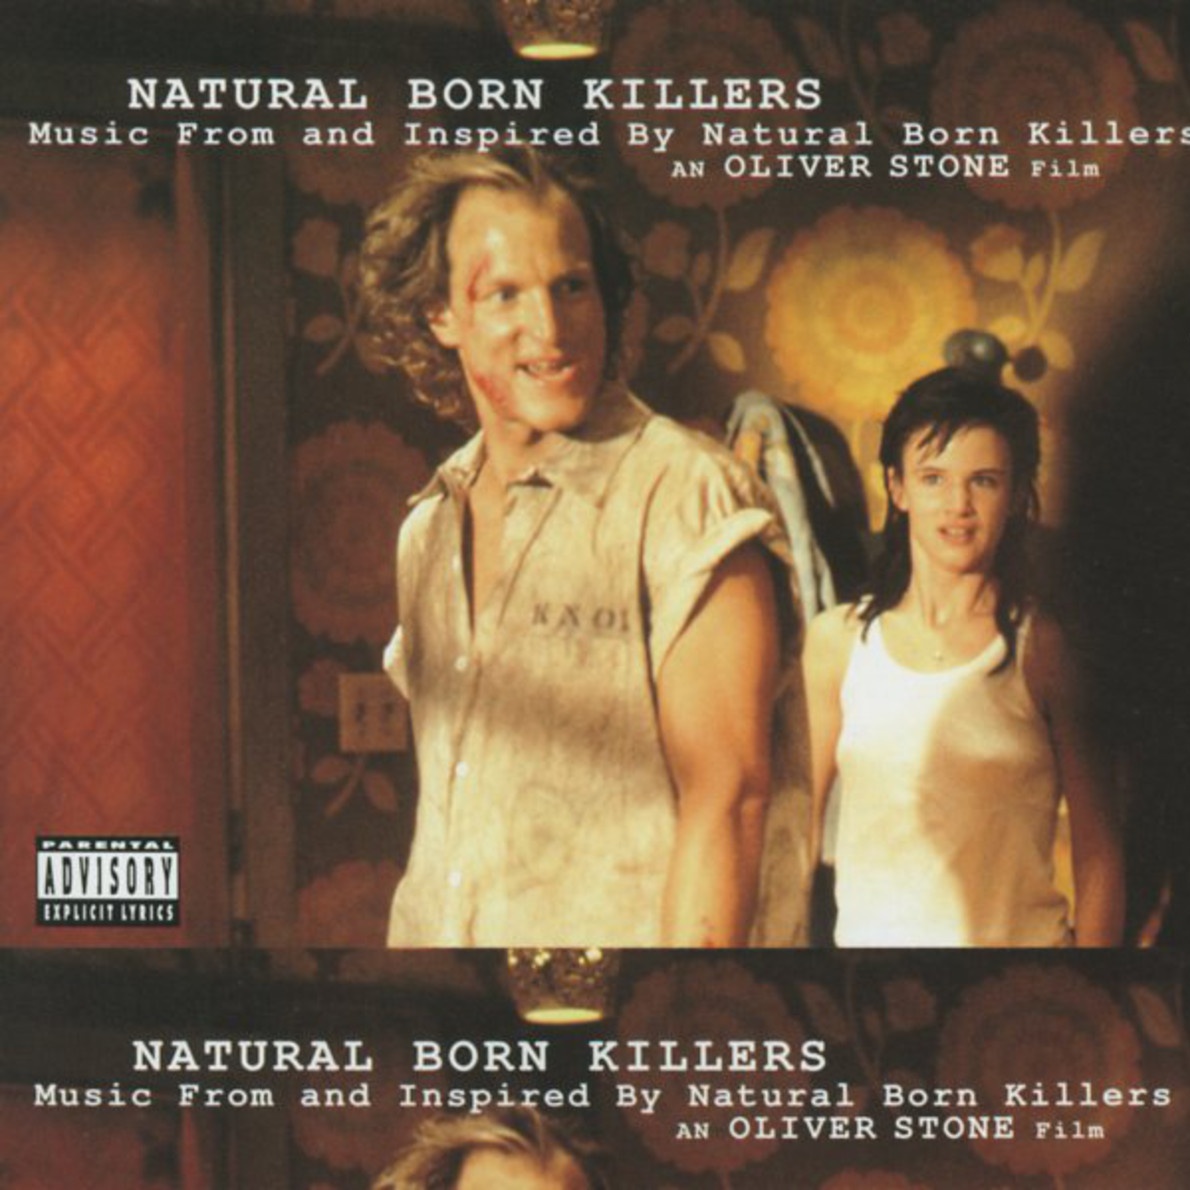 Drums A Go-Go - From "Natural Born Killers" Soundtrack